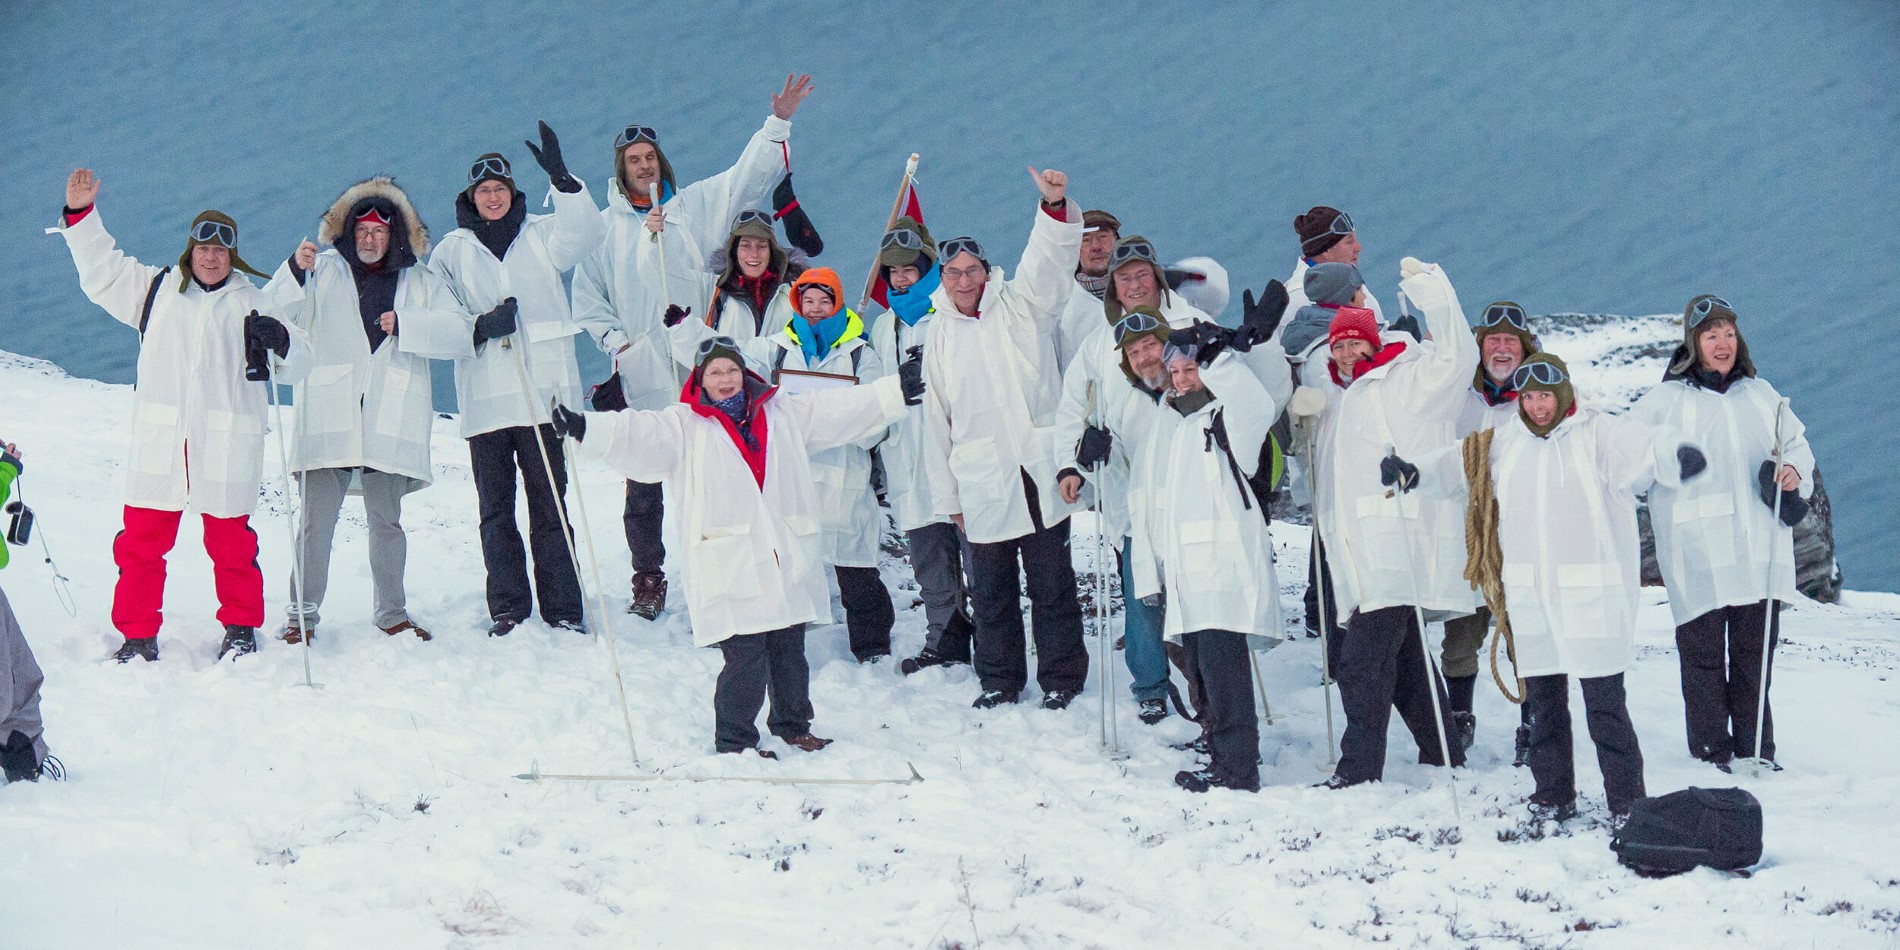 A group of people posing for a picture in the snow